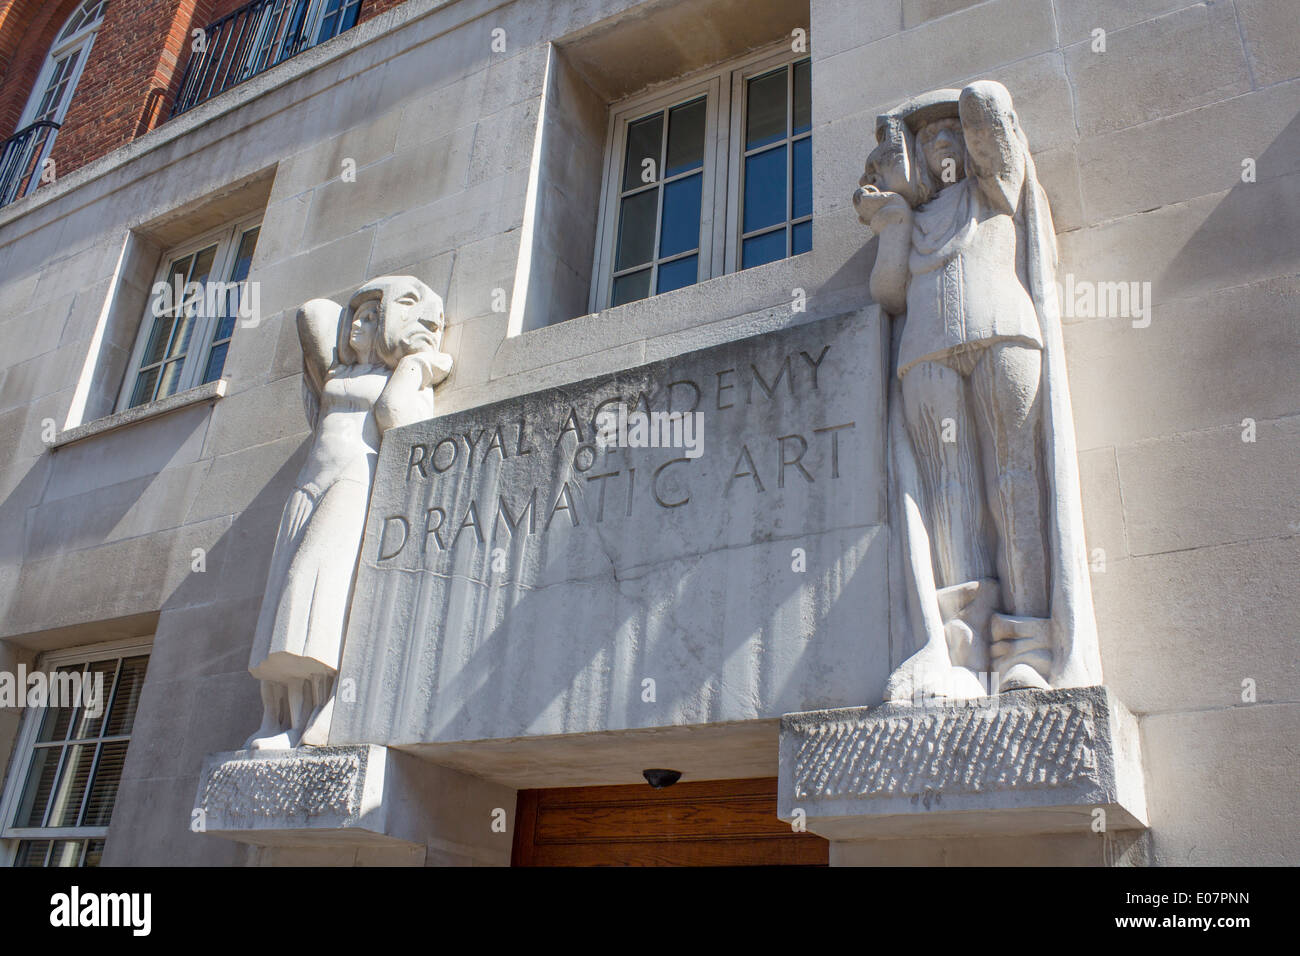 RADA Royal Academy of Dramatic Arts Building entrance with stone sculptures Gower Street Bloomsbury London England UK Stock Photo